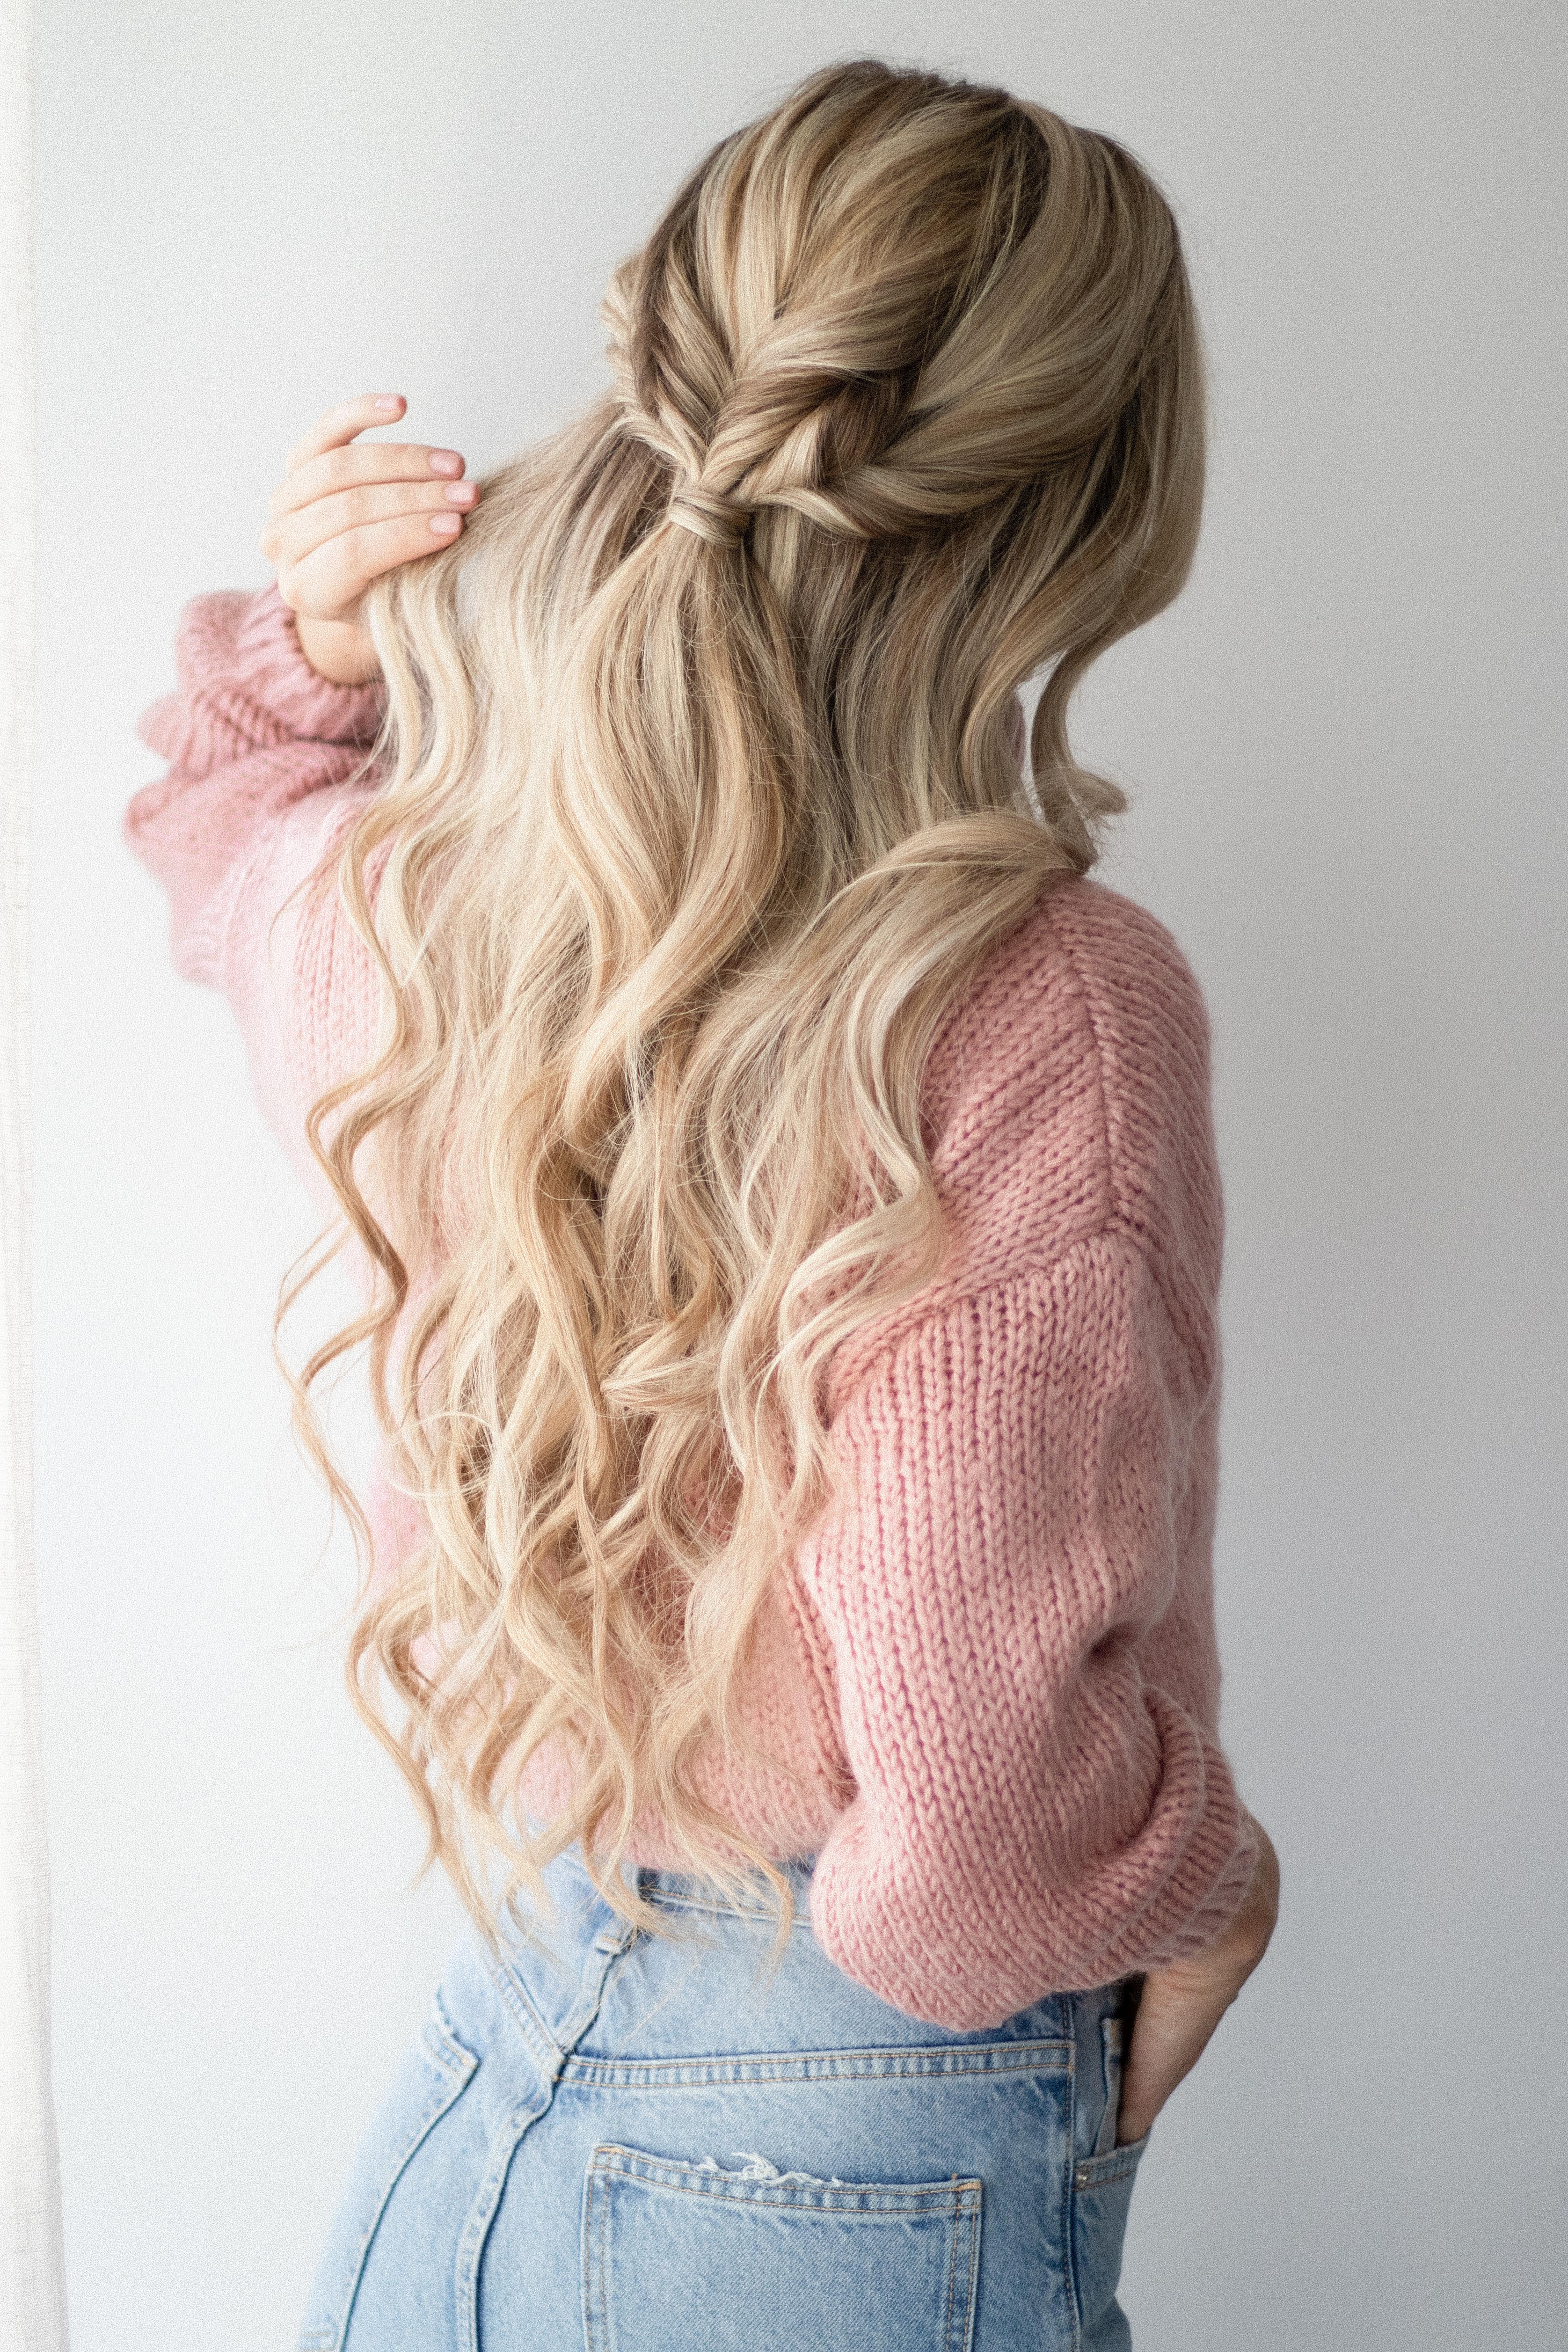 3 Easy Hairstyles that are Perfect for Sweater Weather